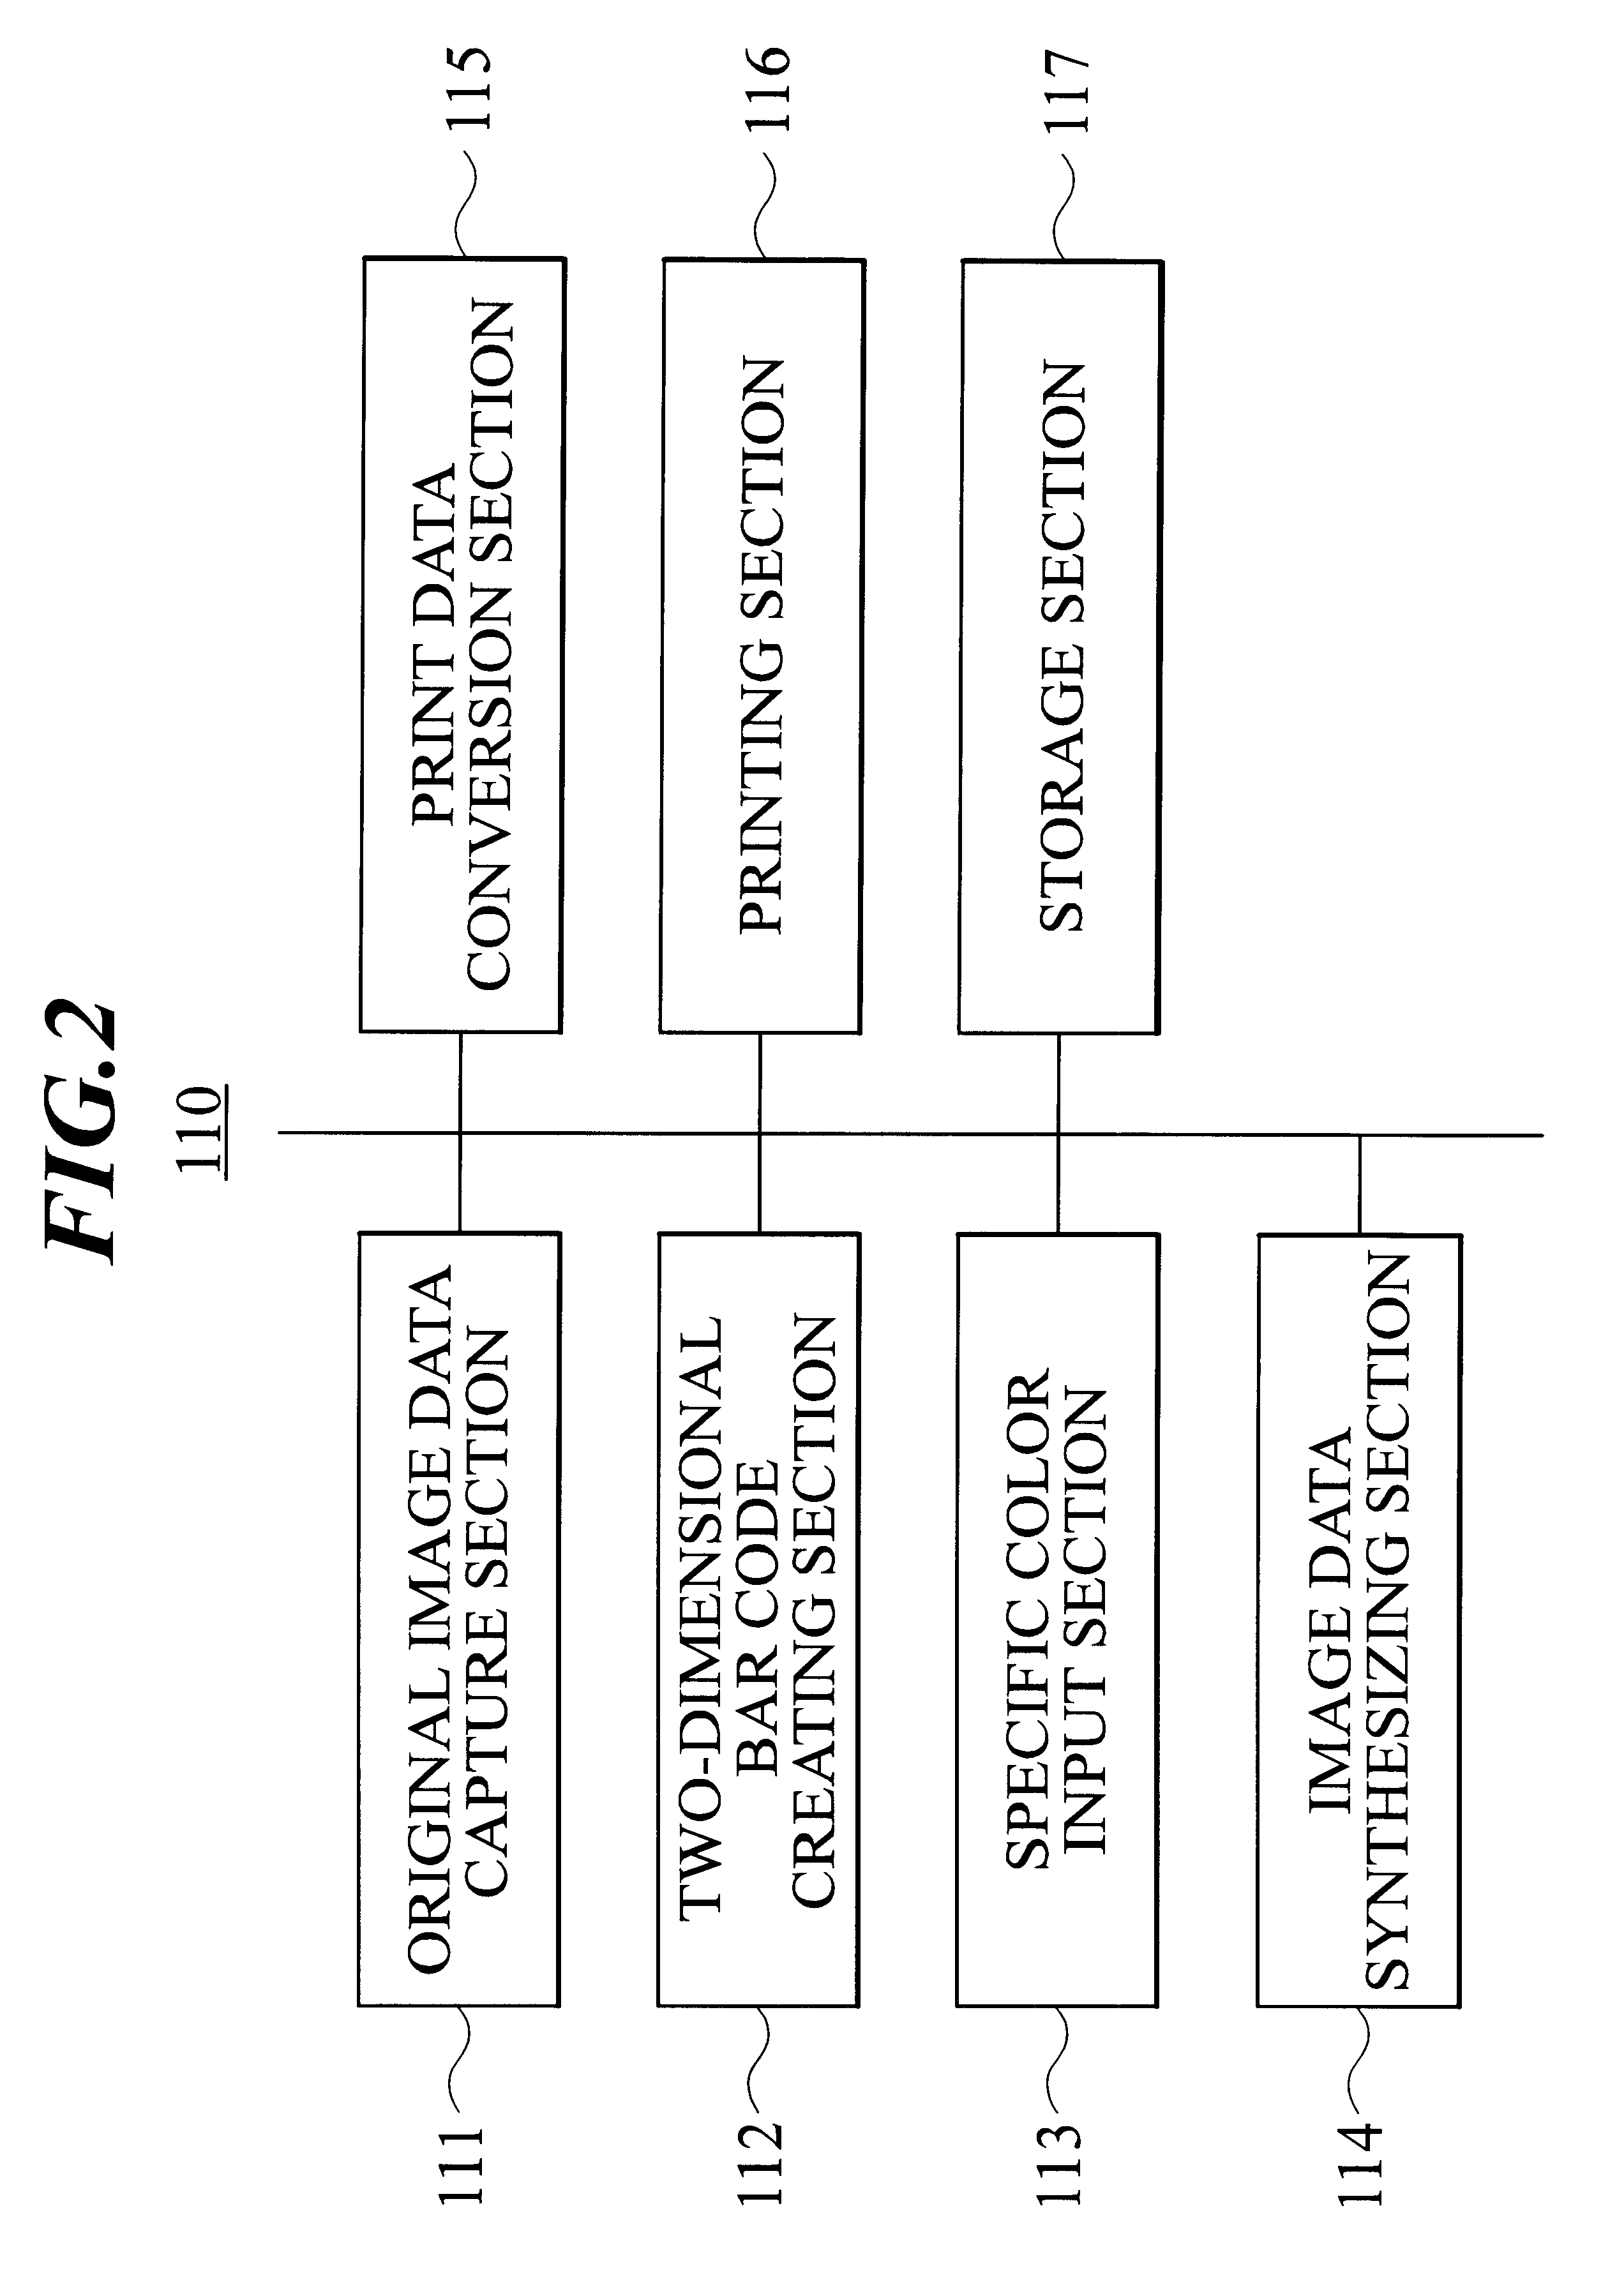 Information code product, manufacturing device and method for manufacturing the same, information code reading device, authentication system, authentication terminal, authentication server, and authentication method